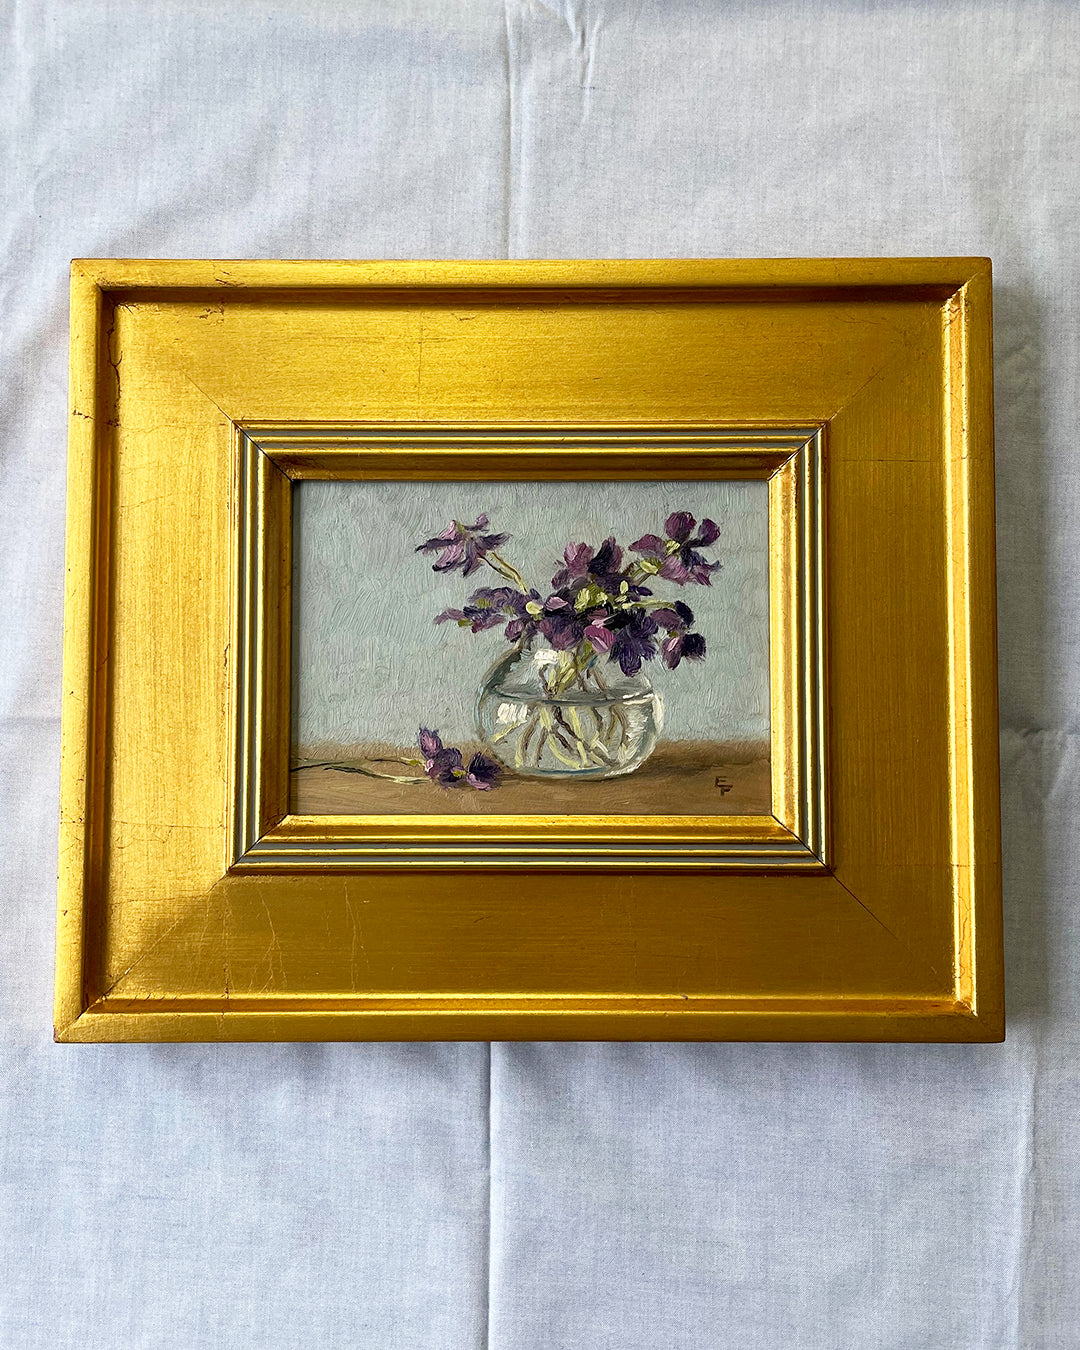 Violets, 5 x 7 inches, oil painting, framed